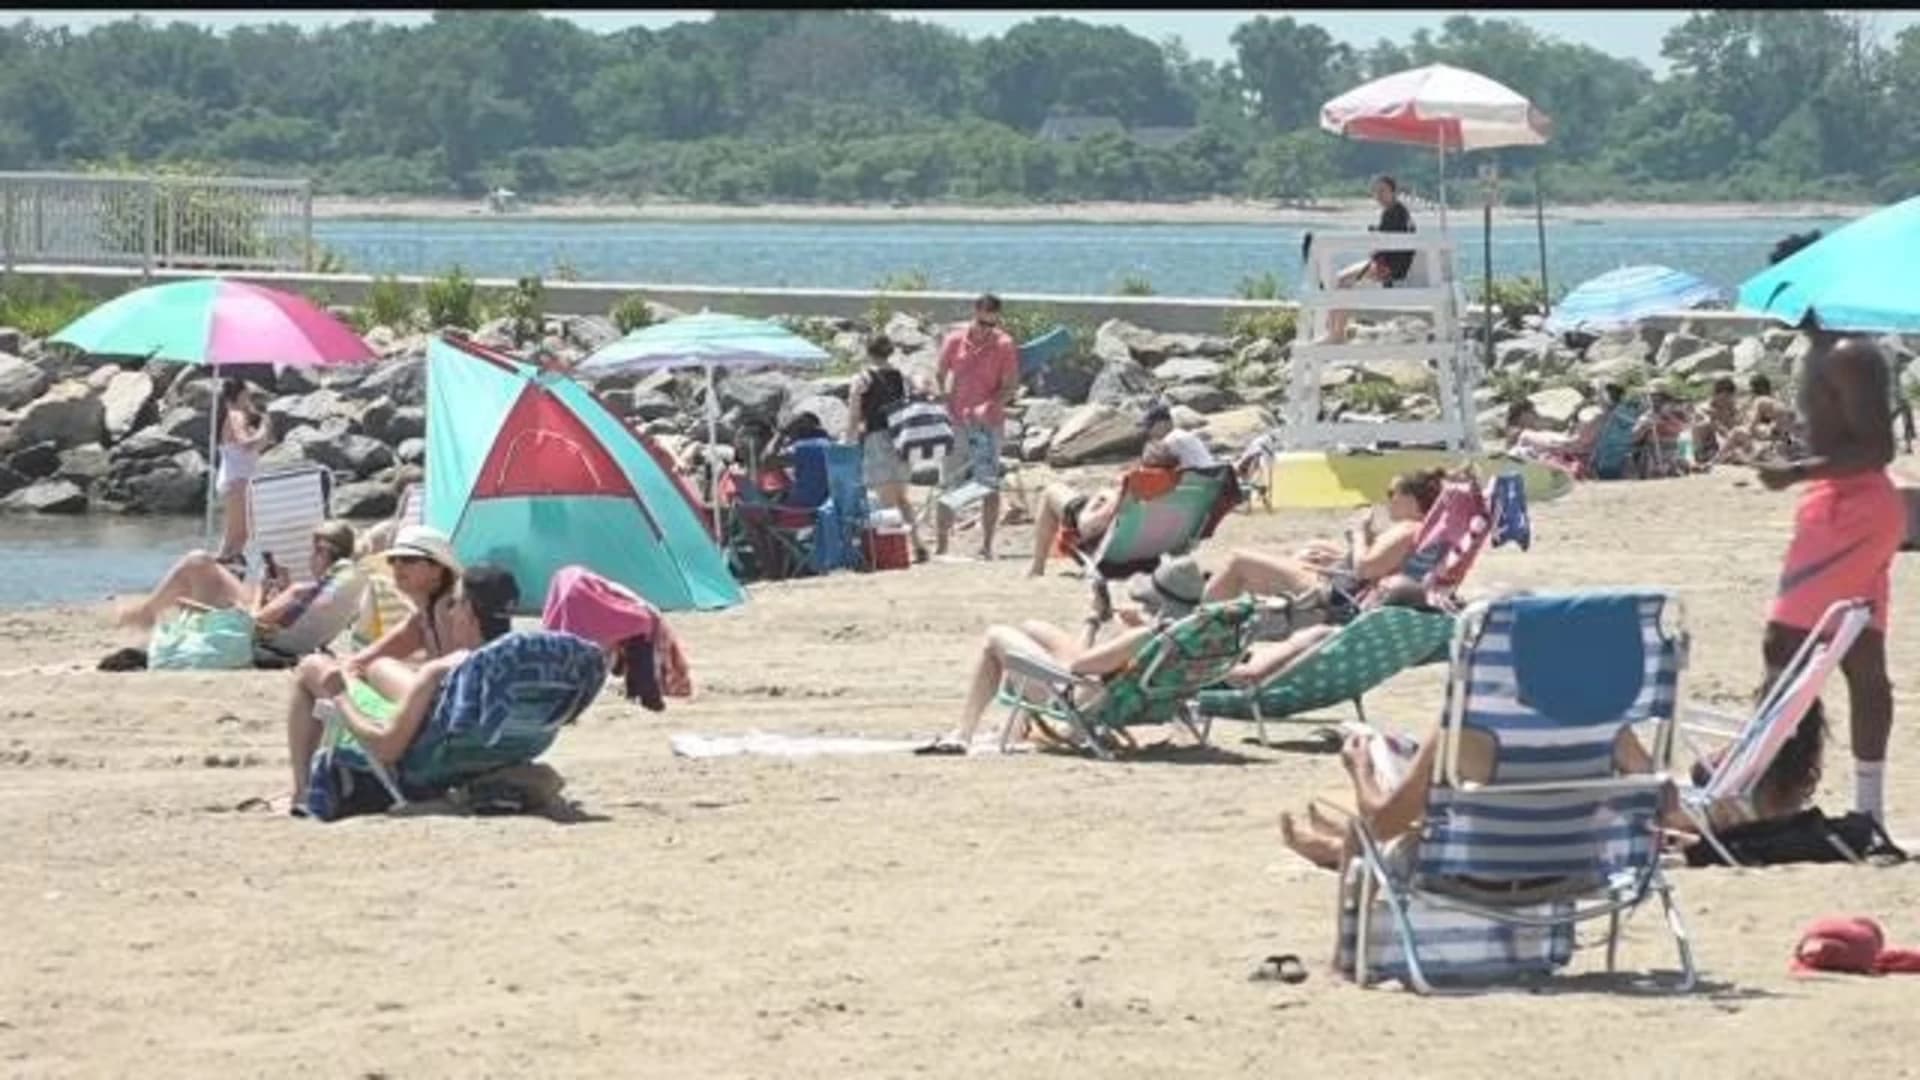 2 CT beaches ranked among those with dirtiest water in the US